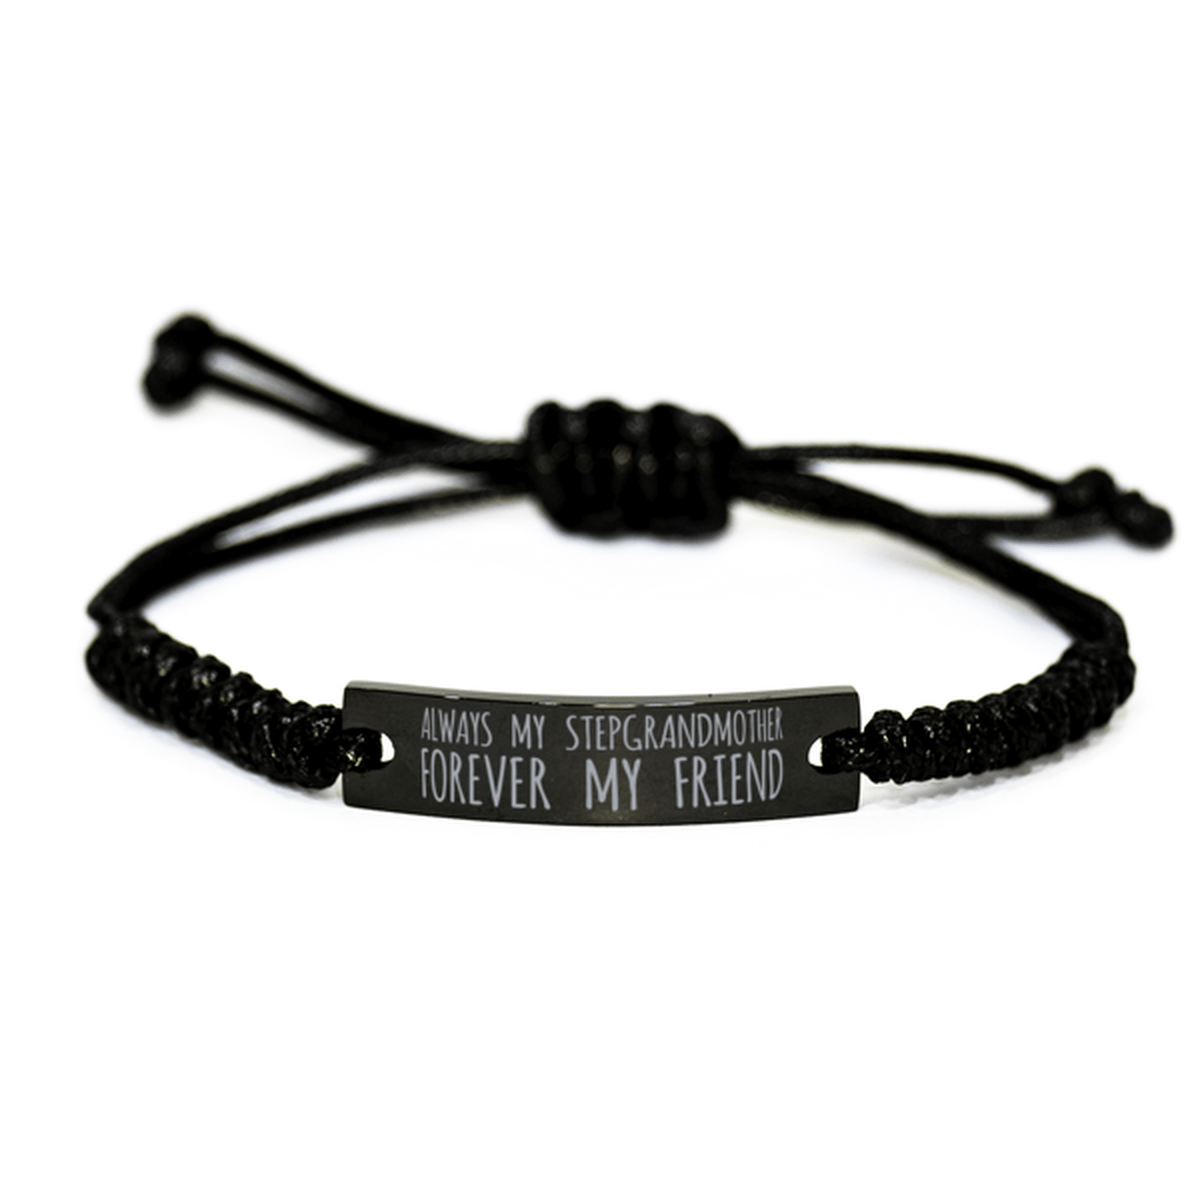 Inspirational Stepgrandmother Black Rope Bracelet, Always My Stepgrandmother Forever My Friend, Best Birthday Gifts For Family